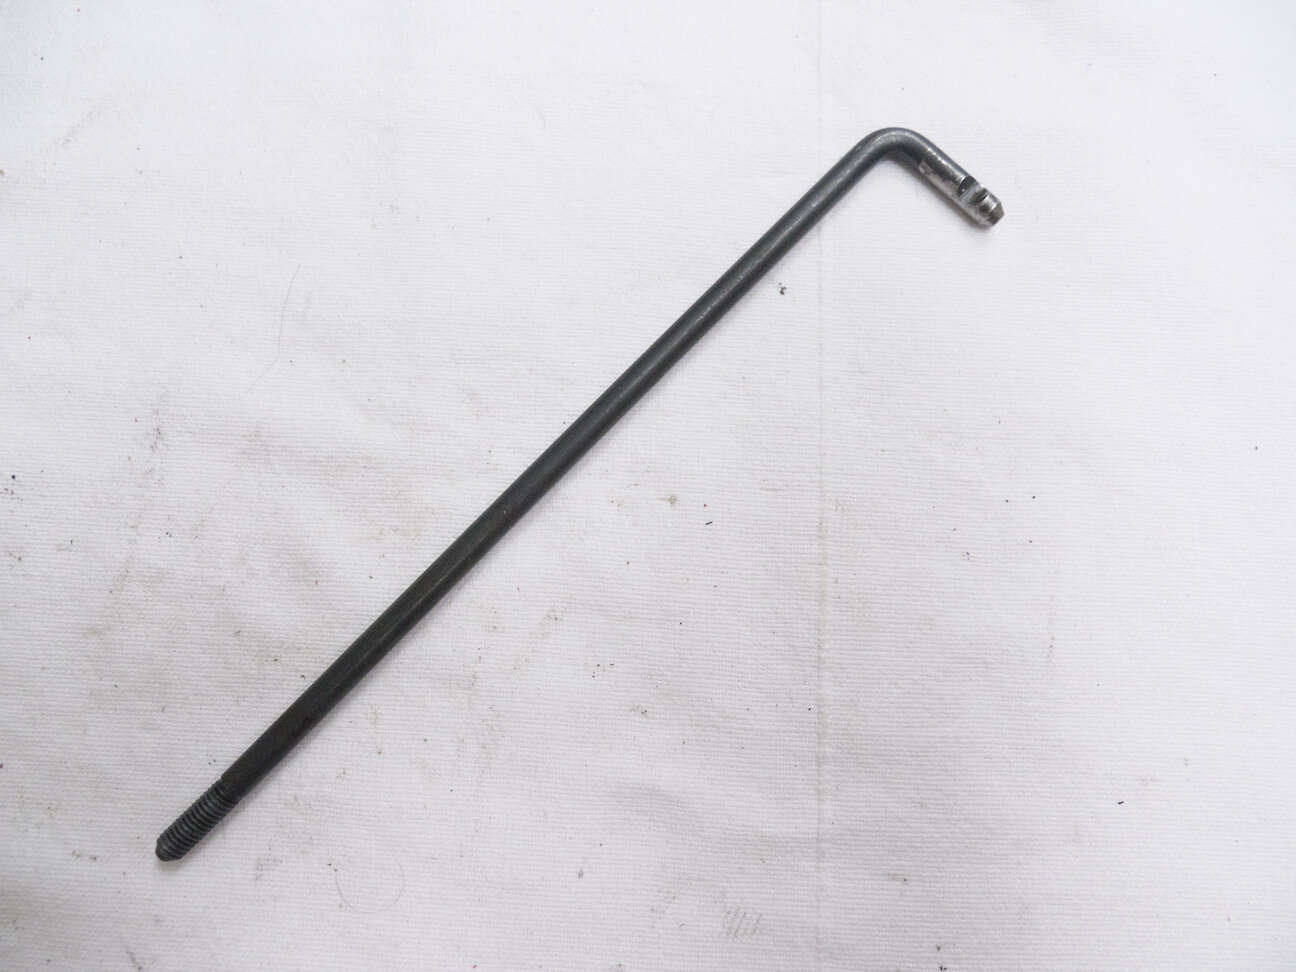 6.25 inch pgp pump rod in great shape, speed demon compatible